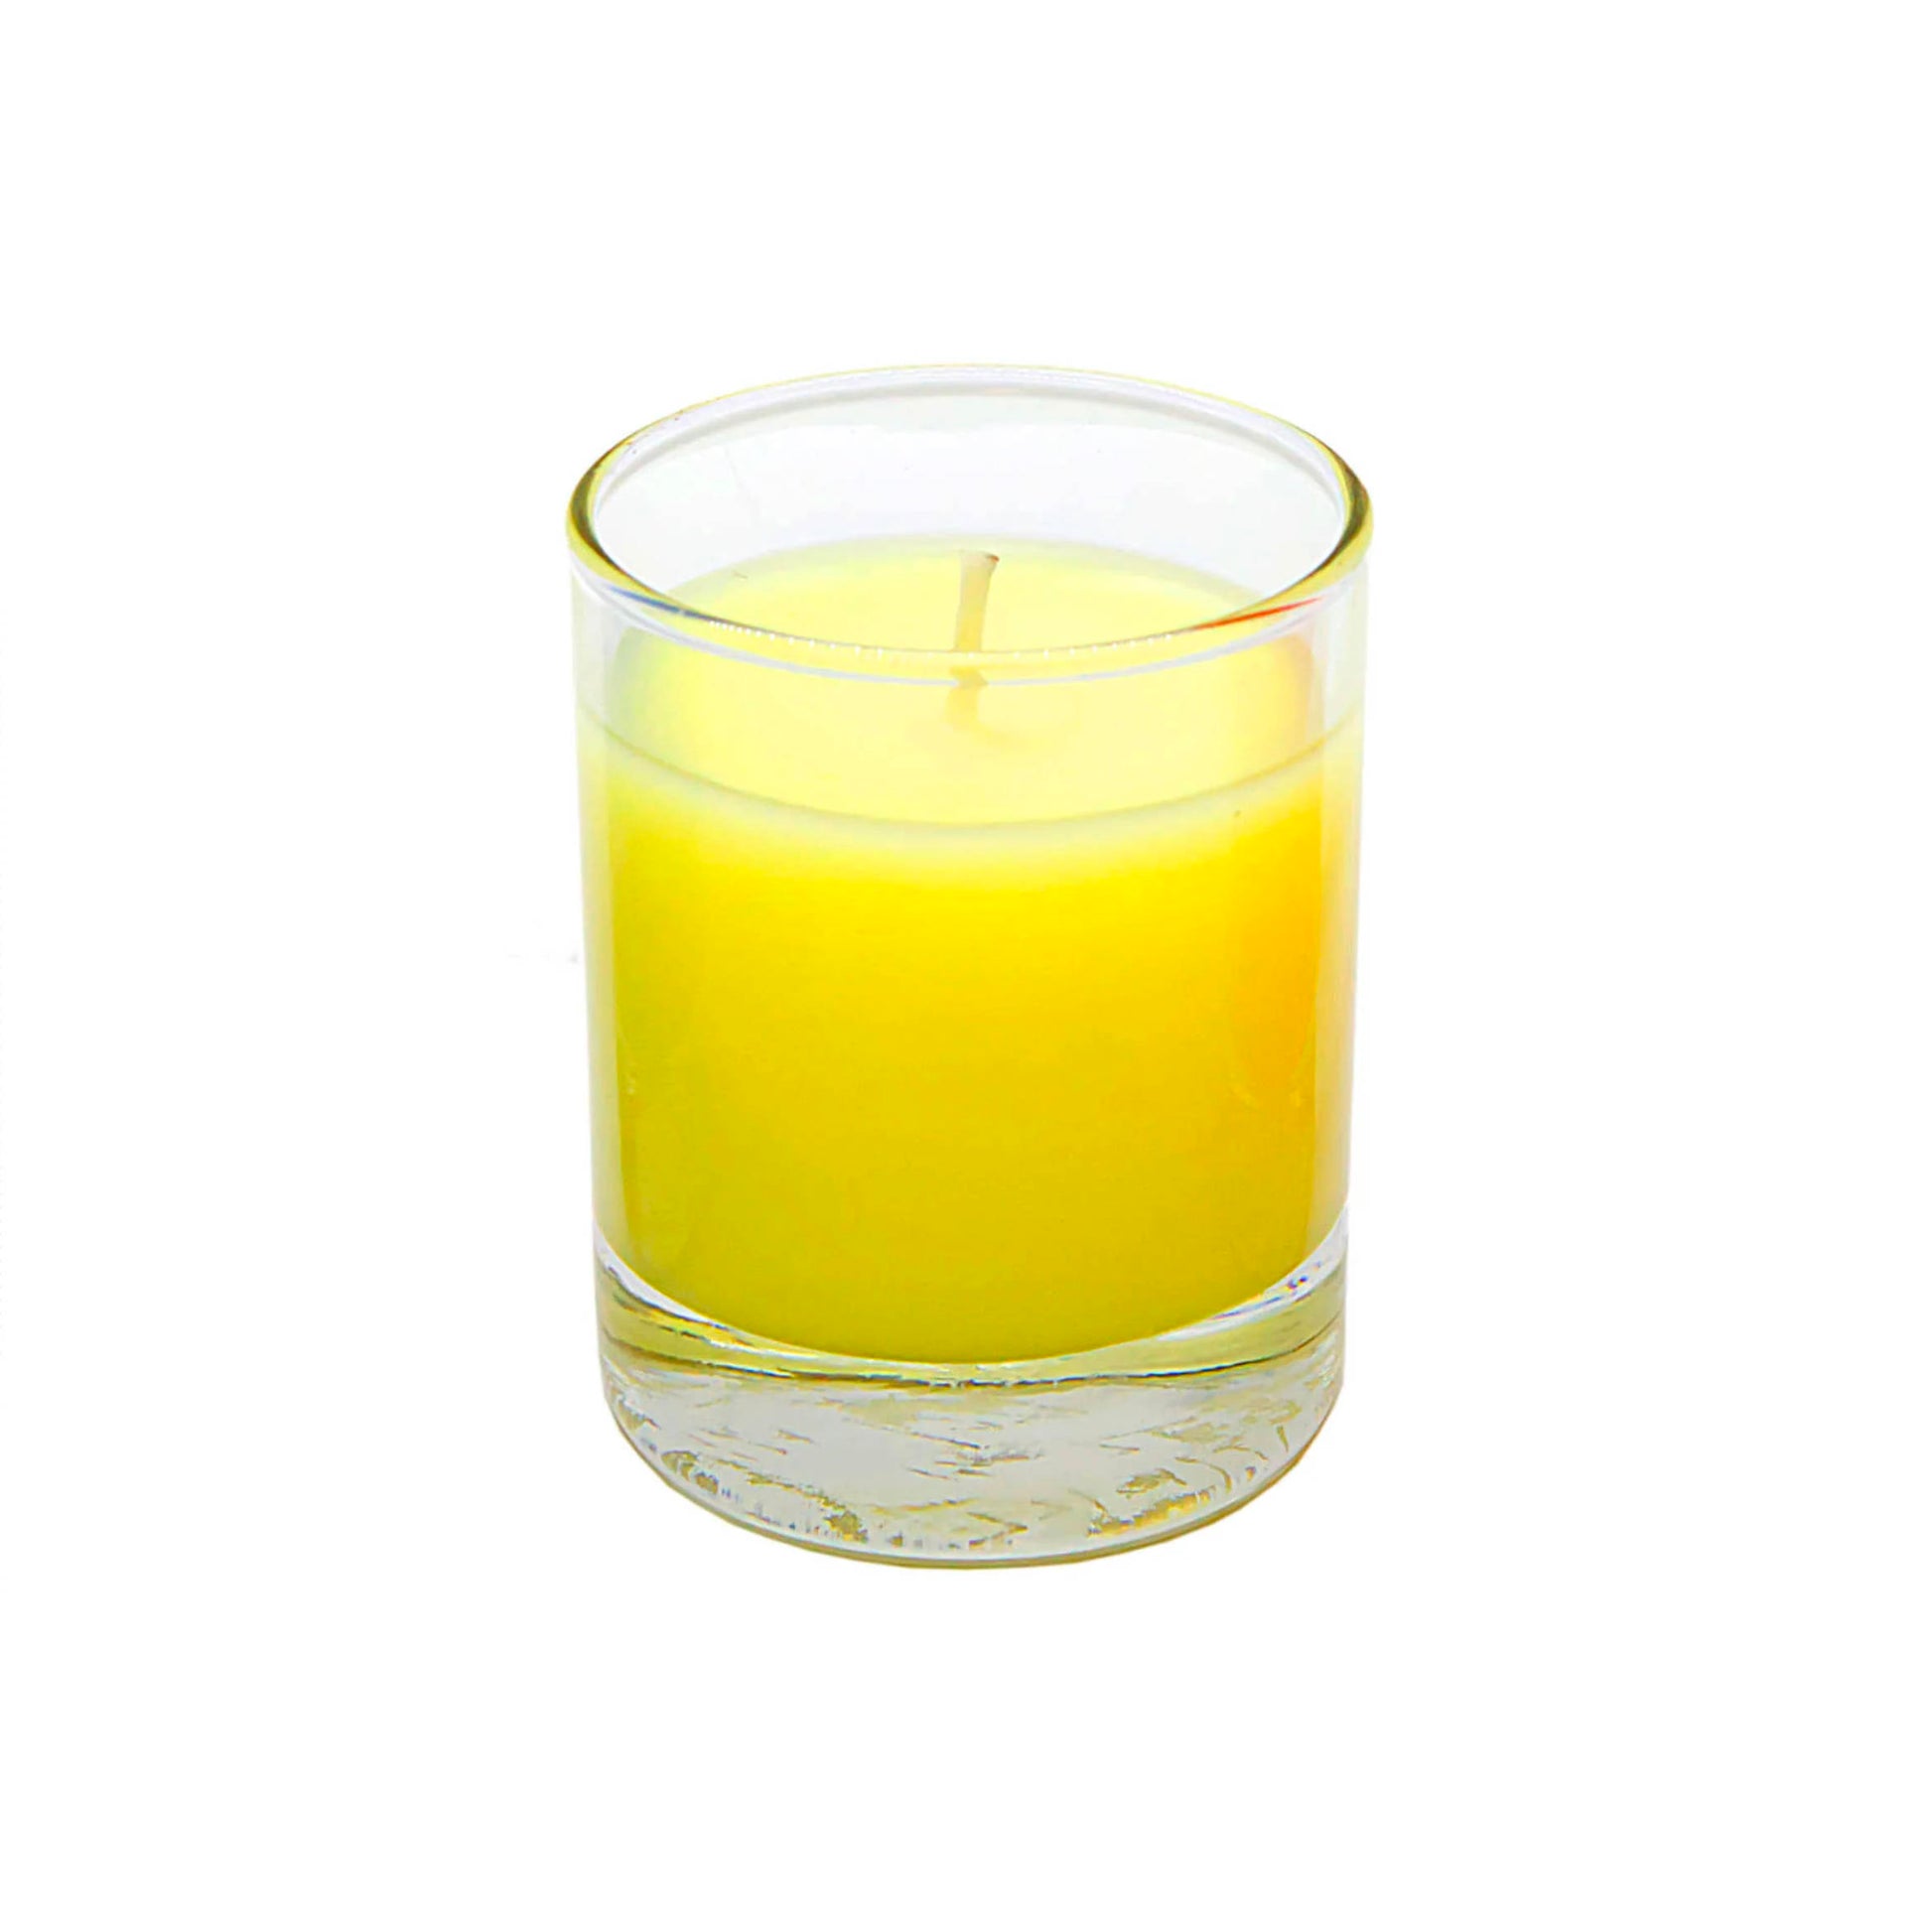 Sunflower Votives mini scented candles